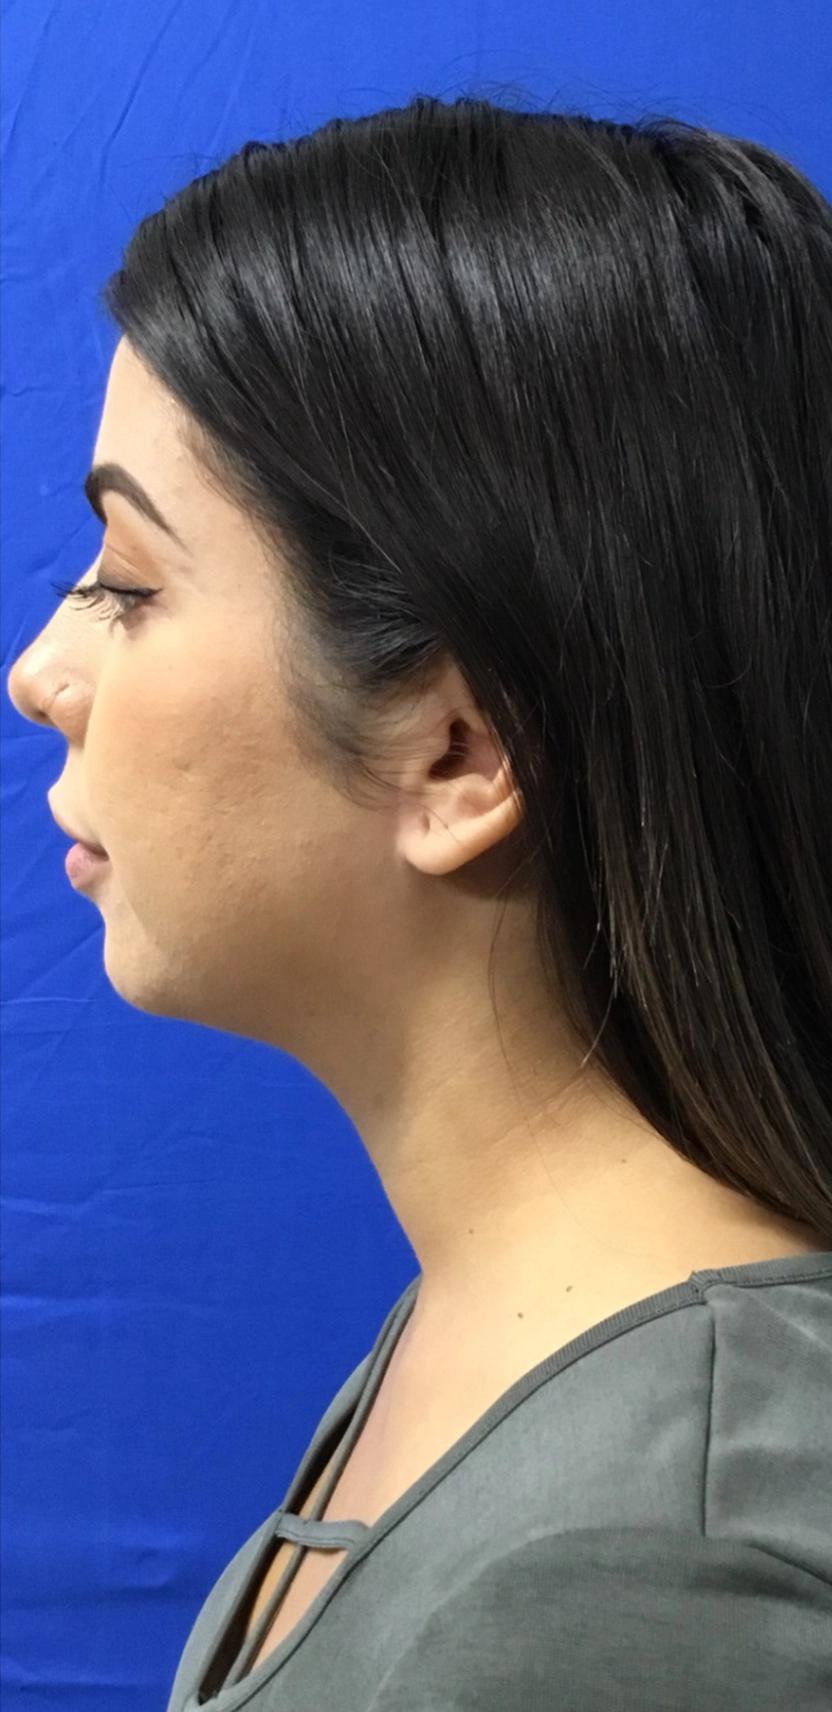 Chin after Kybella injections